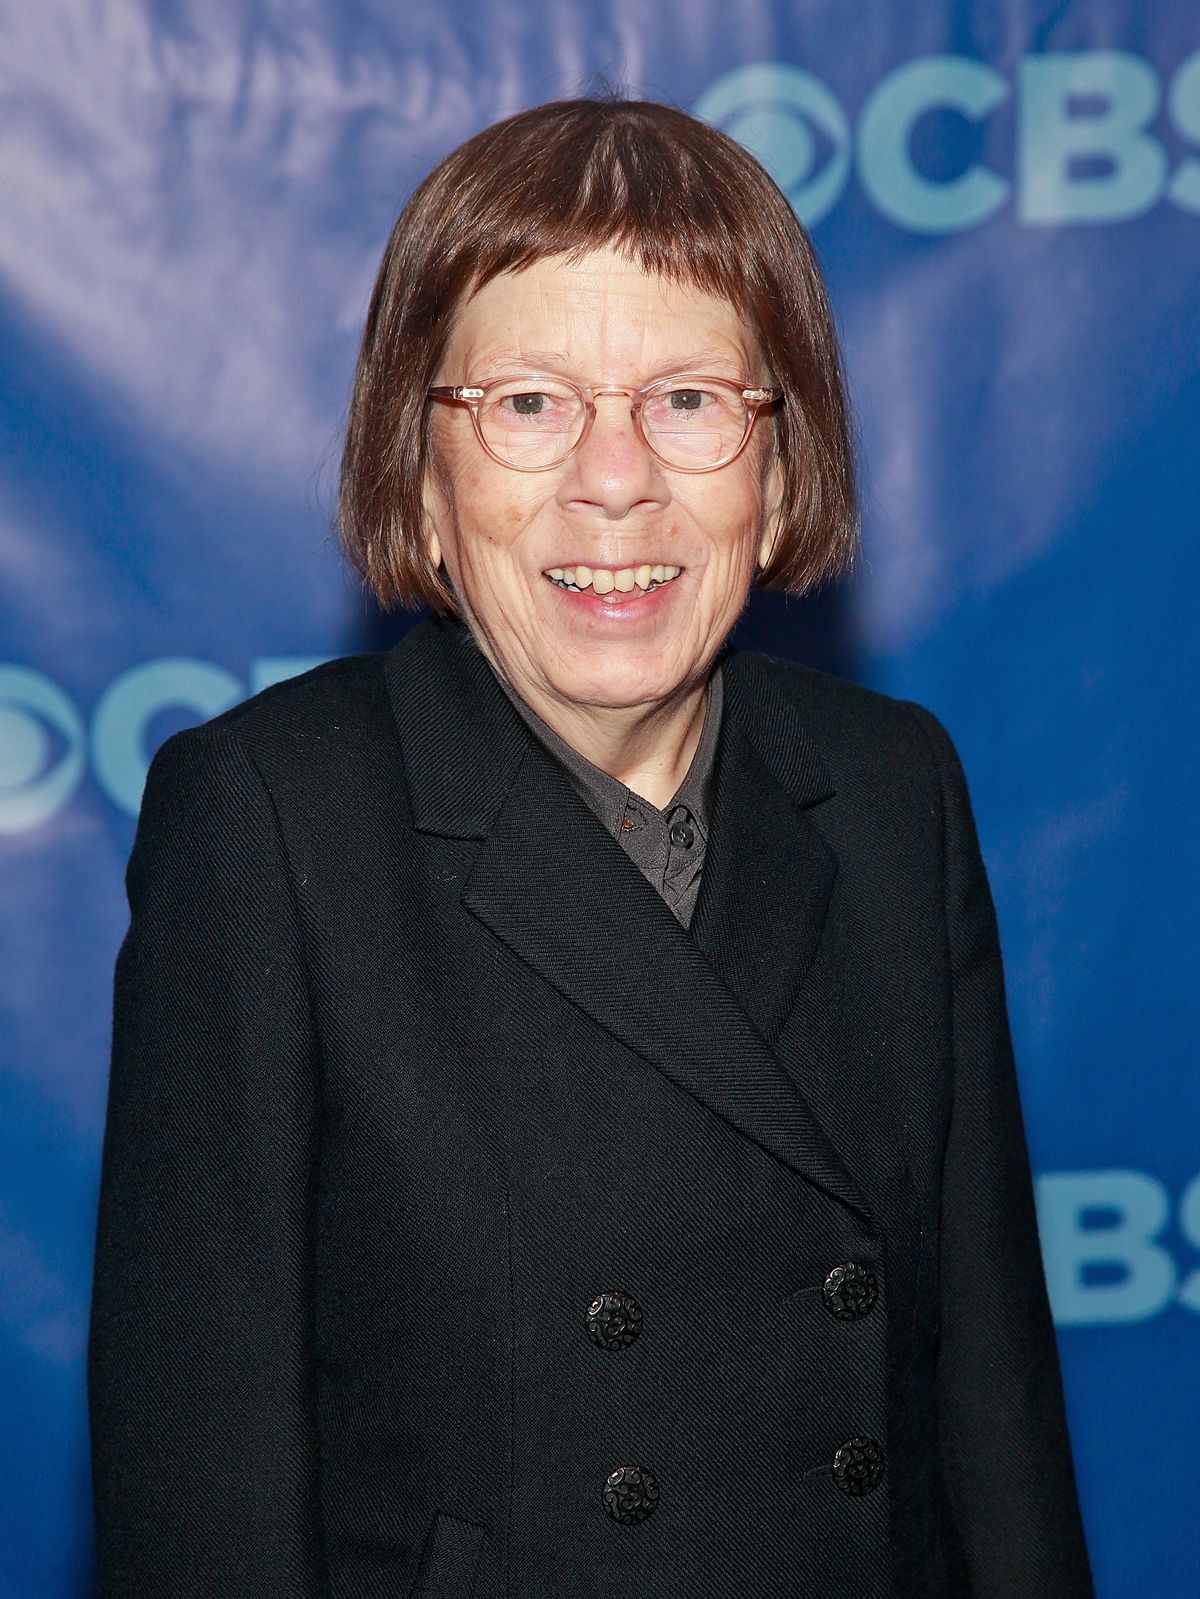 NEW YORK, NY - MAY 18:  "NCIS: Los Angeles" actress Linda Hunt attends the 2011 CBS Upfront at The Tent at Lincoln Center on May 18, 2011 in New York City.  (Photo by Charles Eshelman/FilmMagic) (Charles Eshelman/FilmMagic)